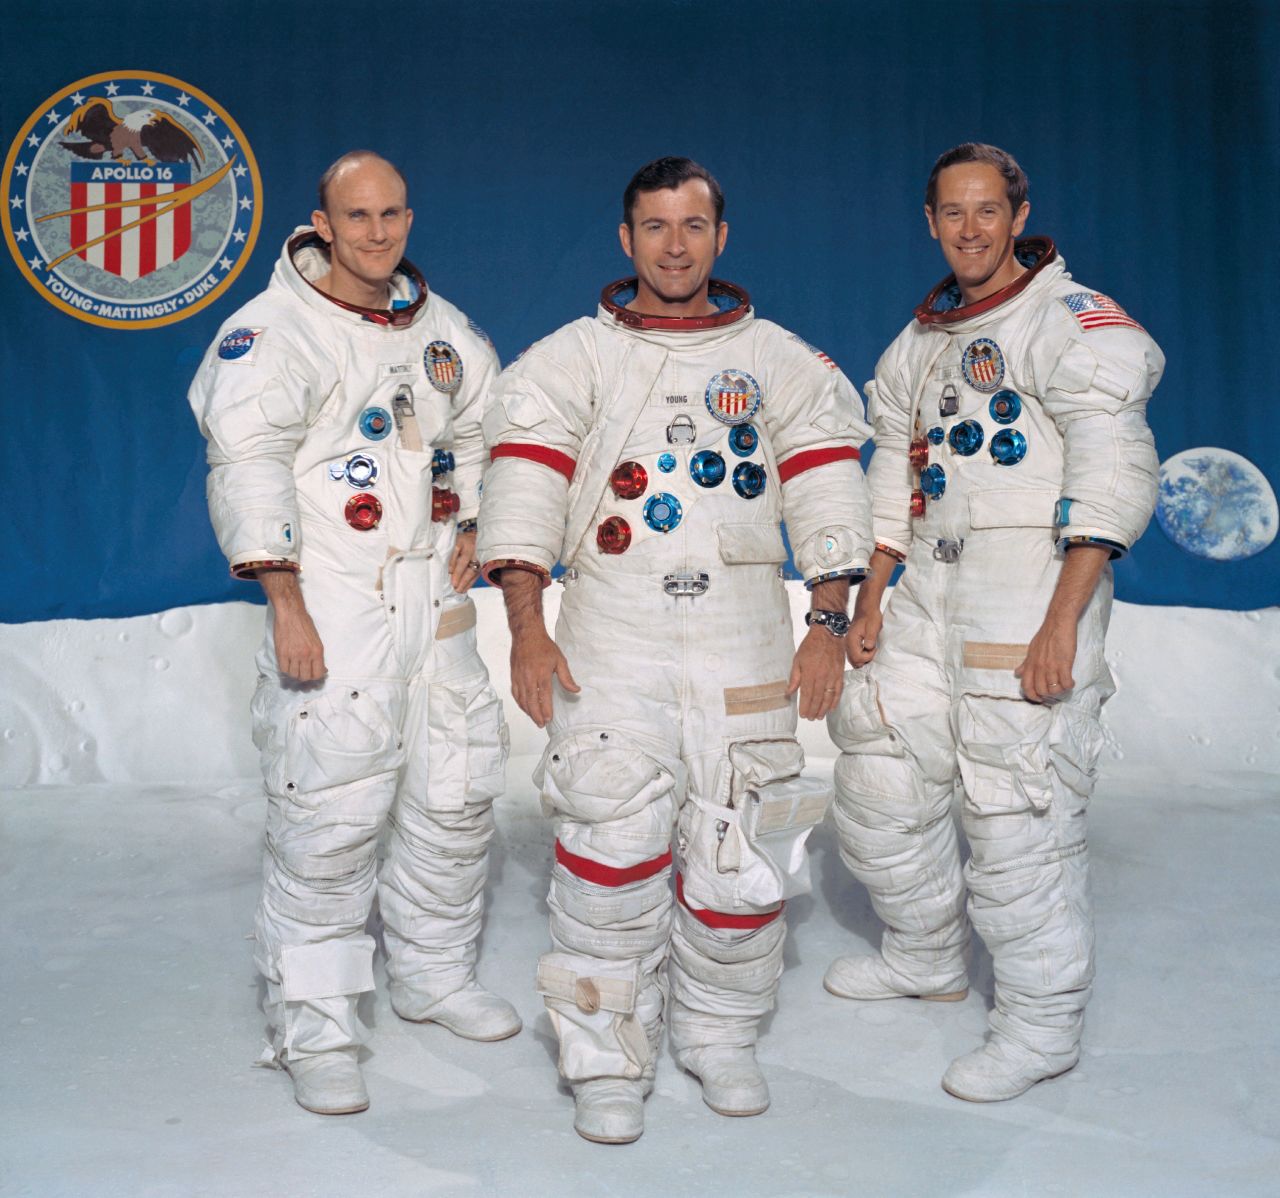 The Apollo 16 crew, from left: Thomas Mattingly, John Young and Charles Duke. Young and Duke walked on the moon while Mattingly stayed in the command module. The mission launched on April 16, 1972, landed on the moon April 20 and returned to Earth on April 27.